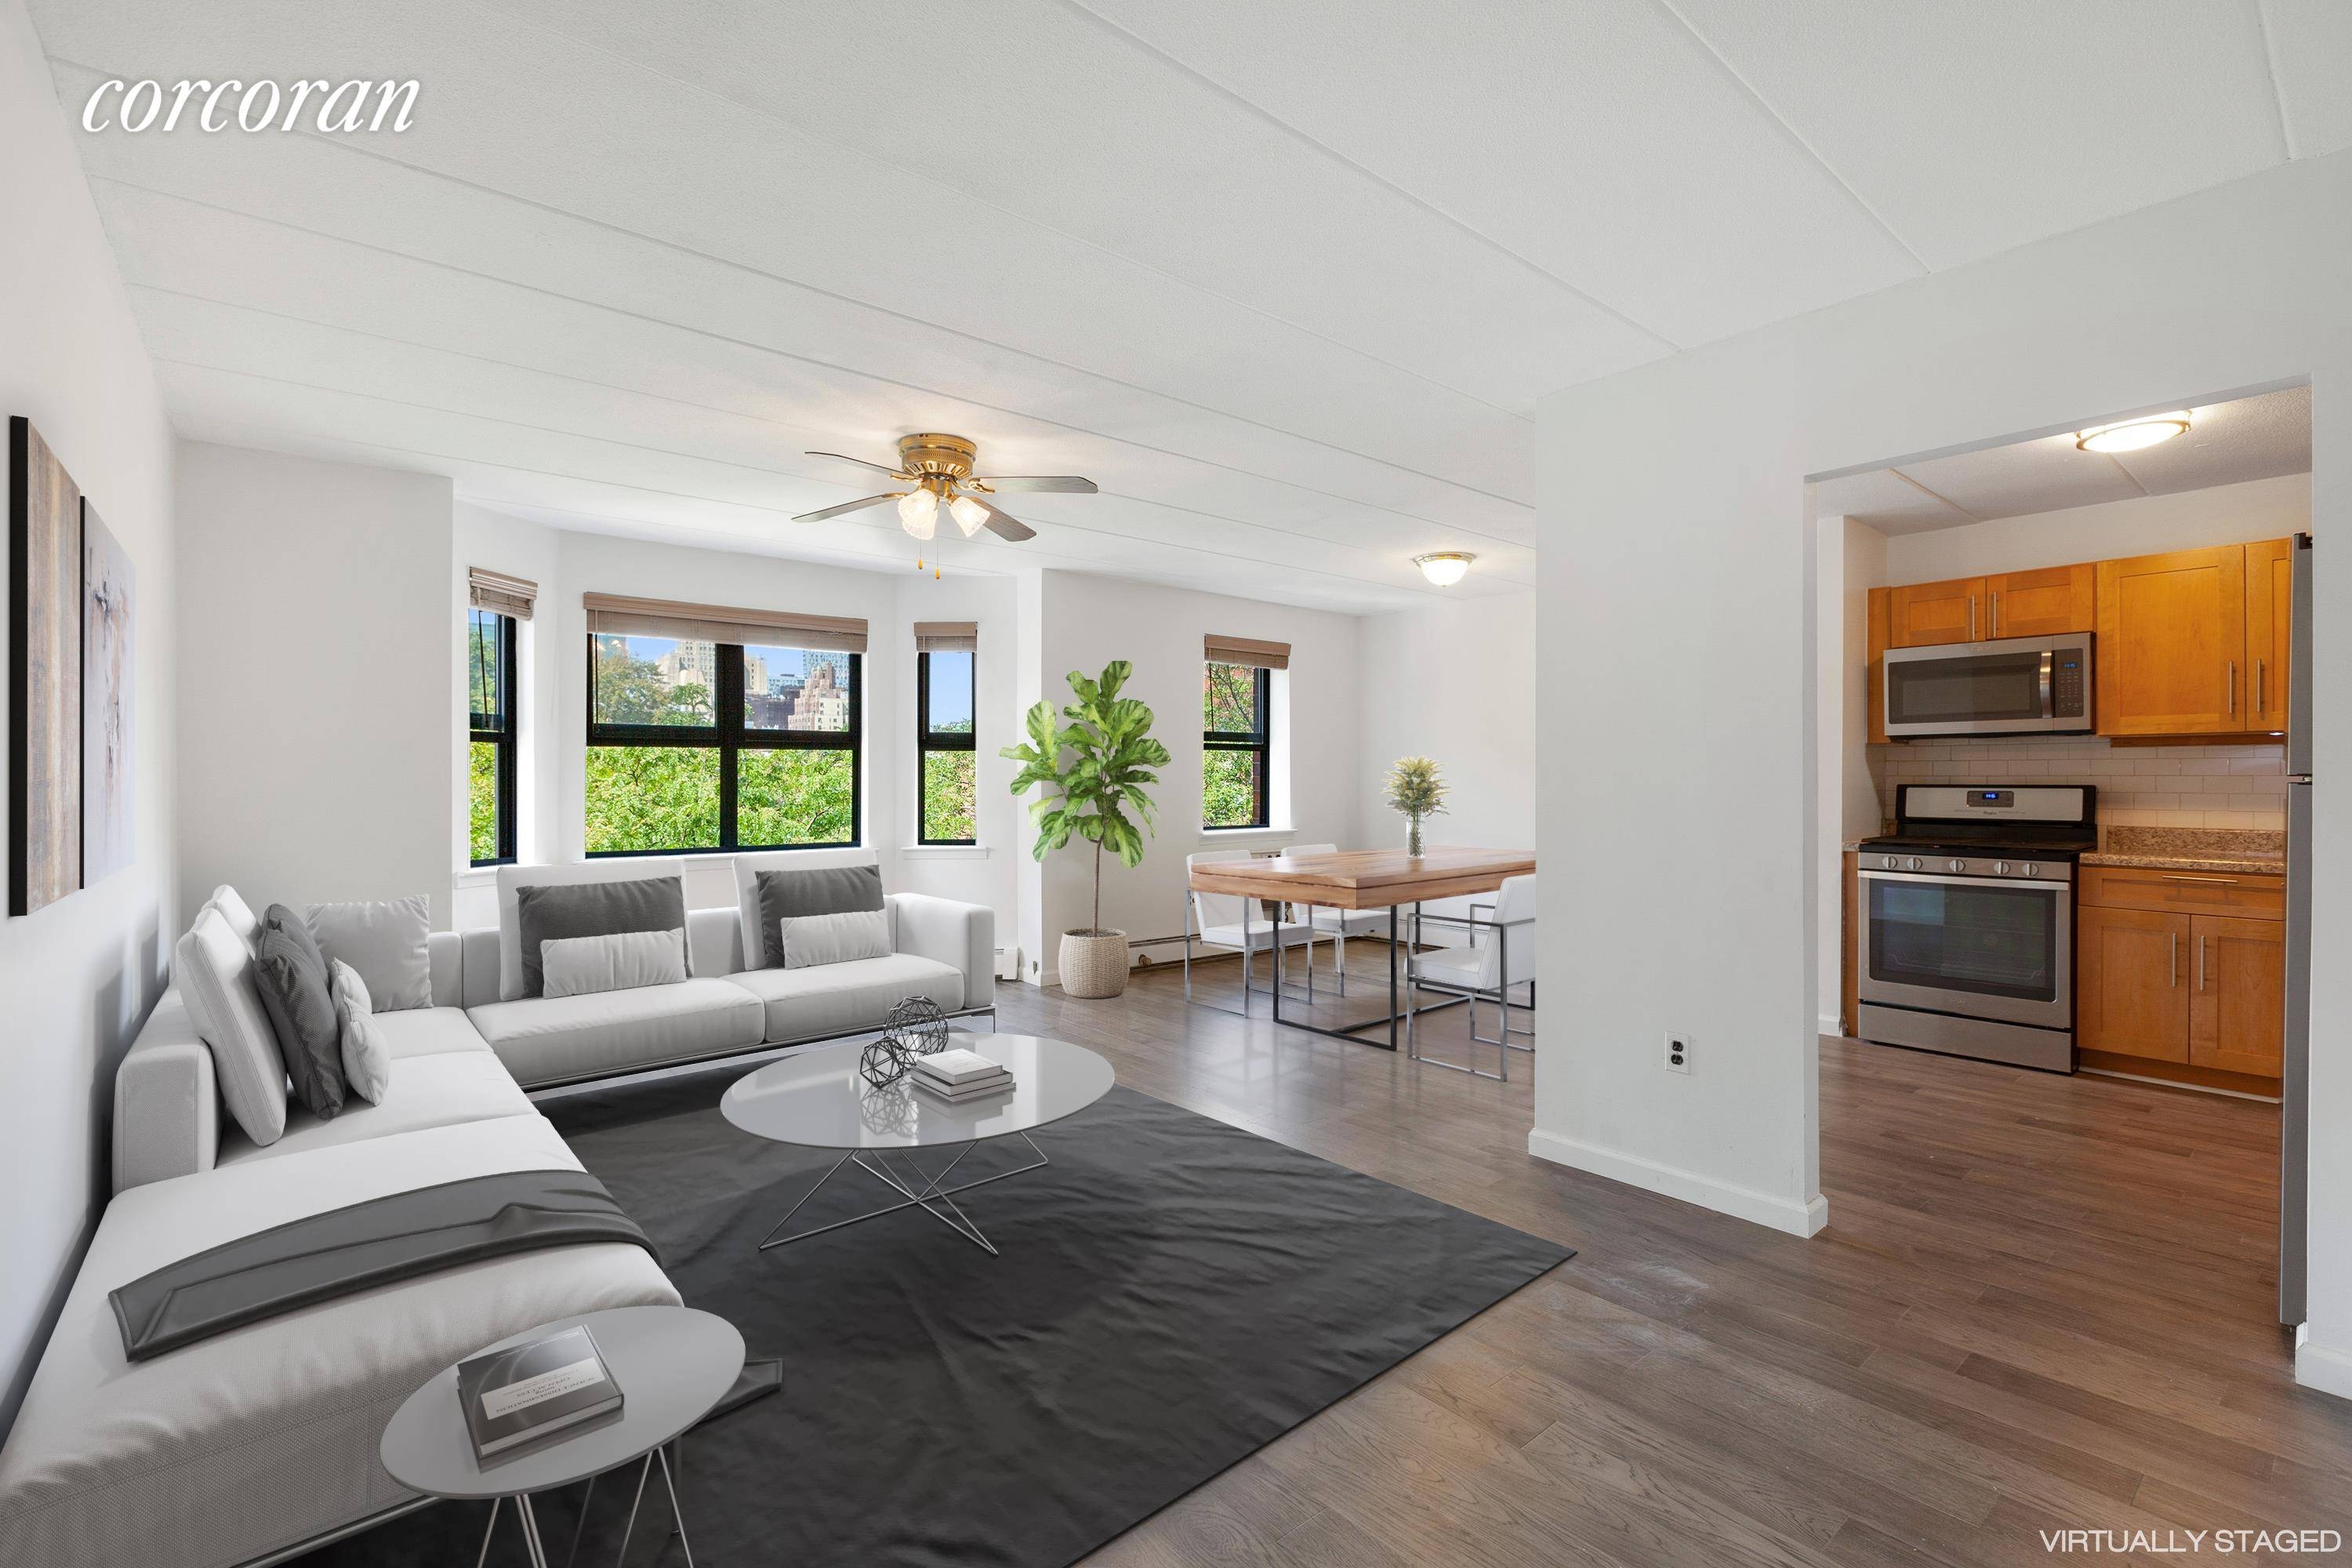 Welcome to 421 Adelphi Street, unit G located in beautiful Fort Greene, Brooklyn !